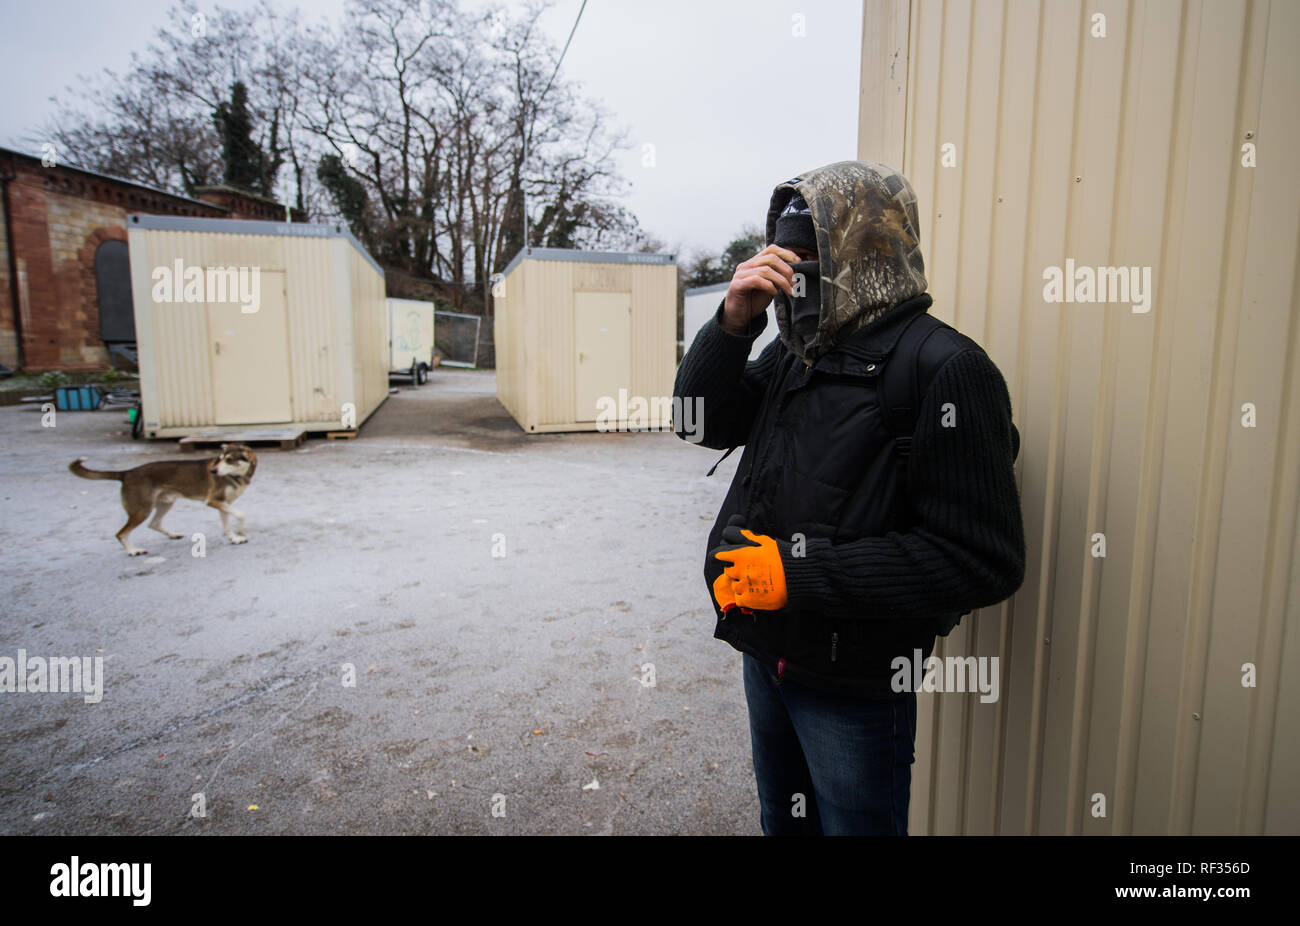 22 January 2019, Rhineland-Palatinate, Mainz: Günni (50) stands between the living containers and pulls his buff upwards as protection against the cold. The father of a daughter (29) spent 22 years in prison, according to his own statement. He's currently dry and off the drugs thanks to the substitute drug Subutex. He prefers to sleep on the street or in empty houses, in the official accommodations there is always trouble, fights, alcohol problems and thefts. Over the winter, the city of Mainz has set up residential containers for the homeless at Fort Hauptstein near the main railway station. Stock Photo